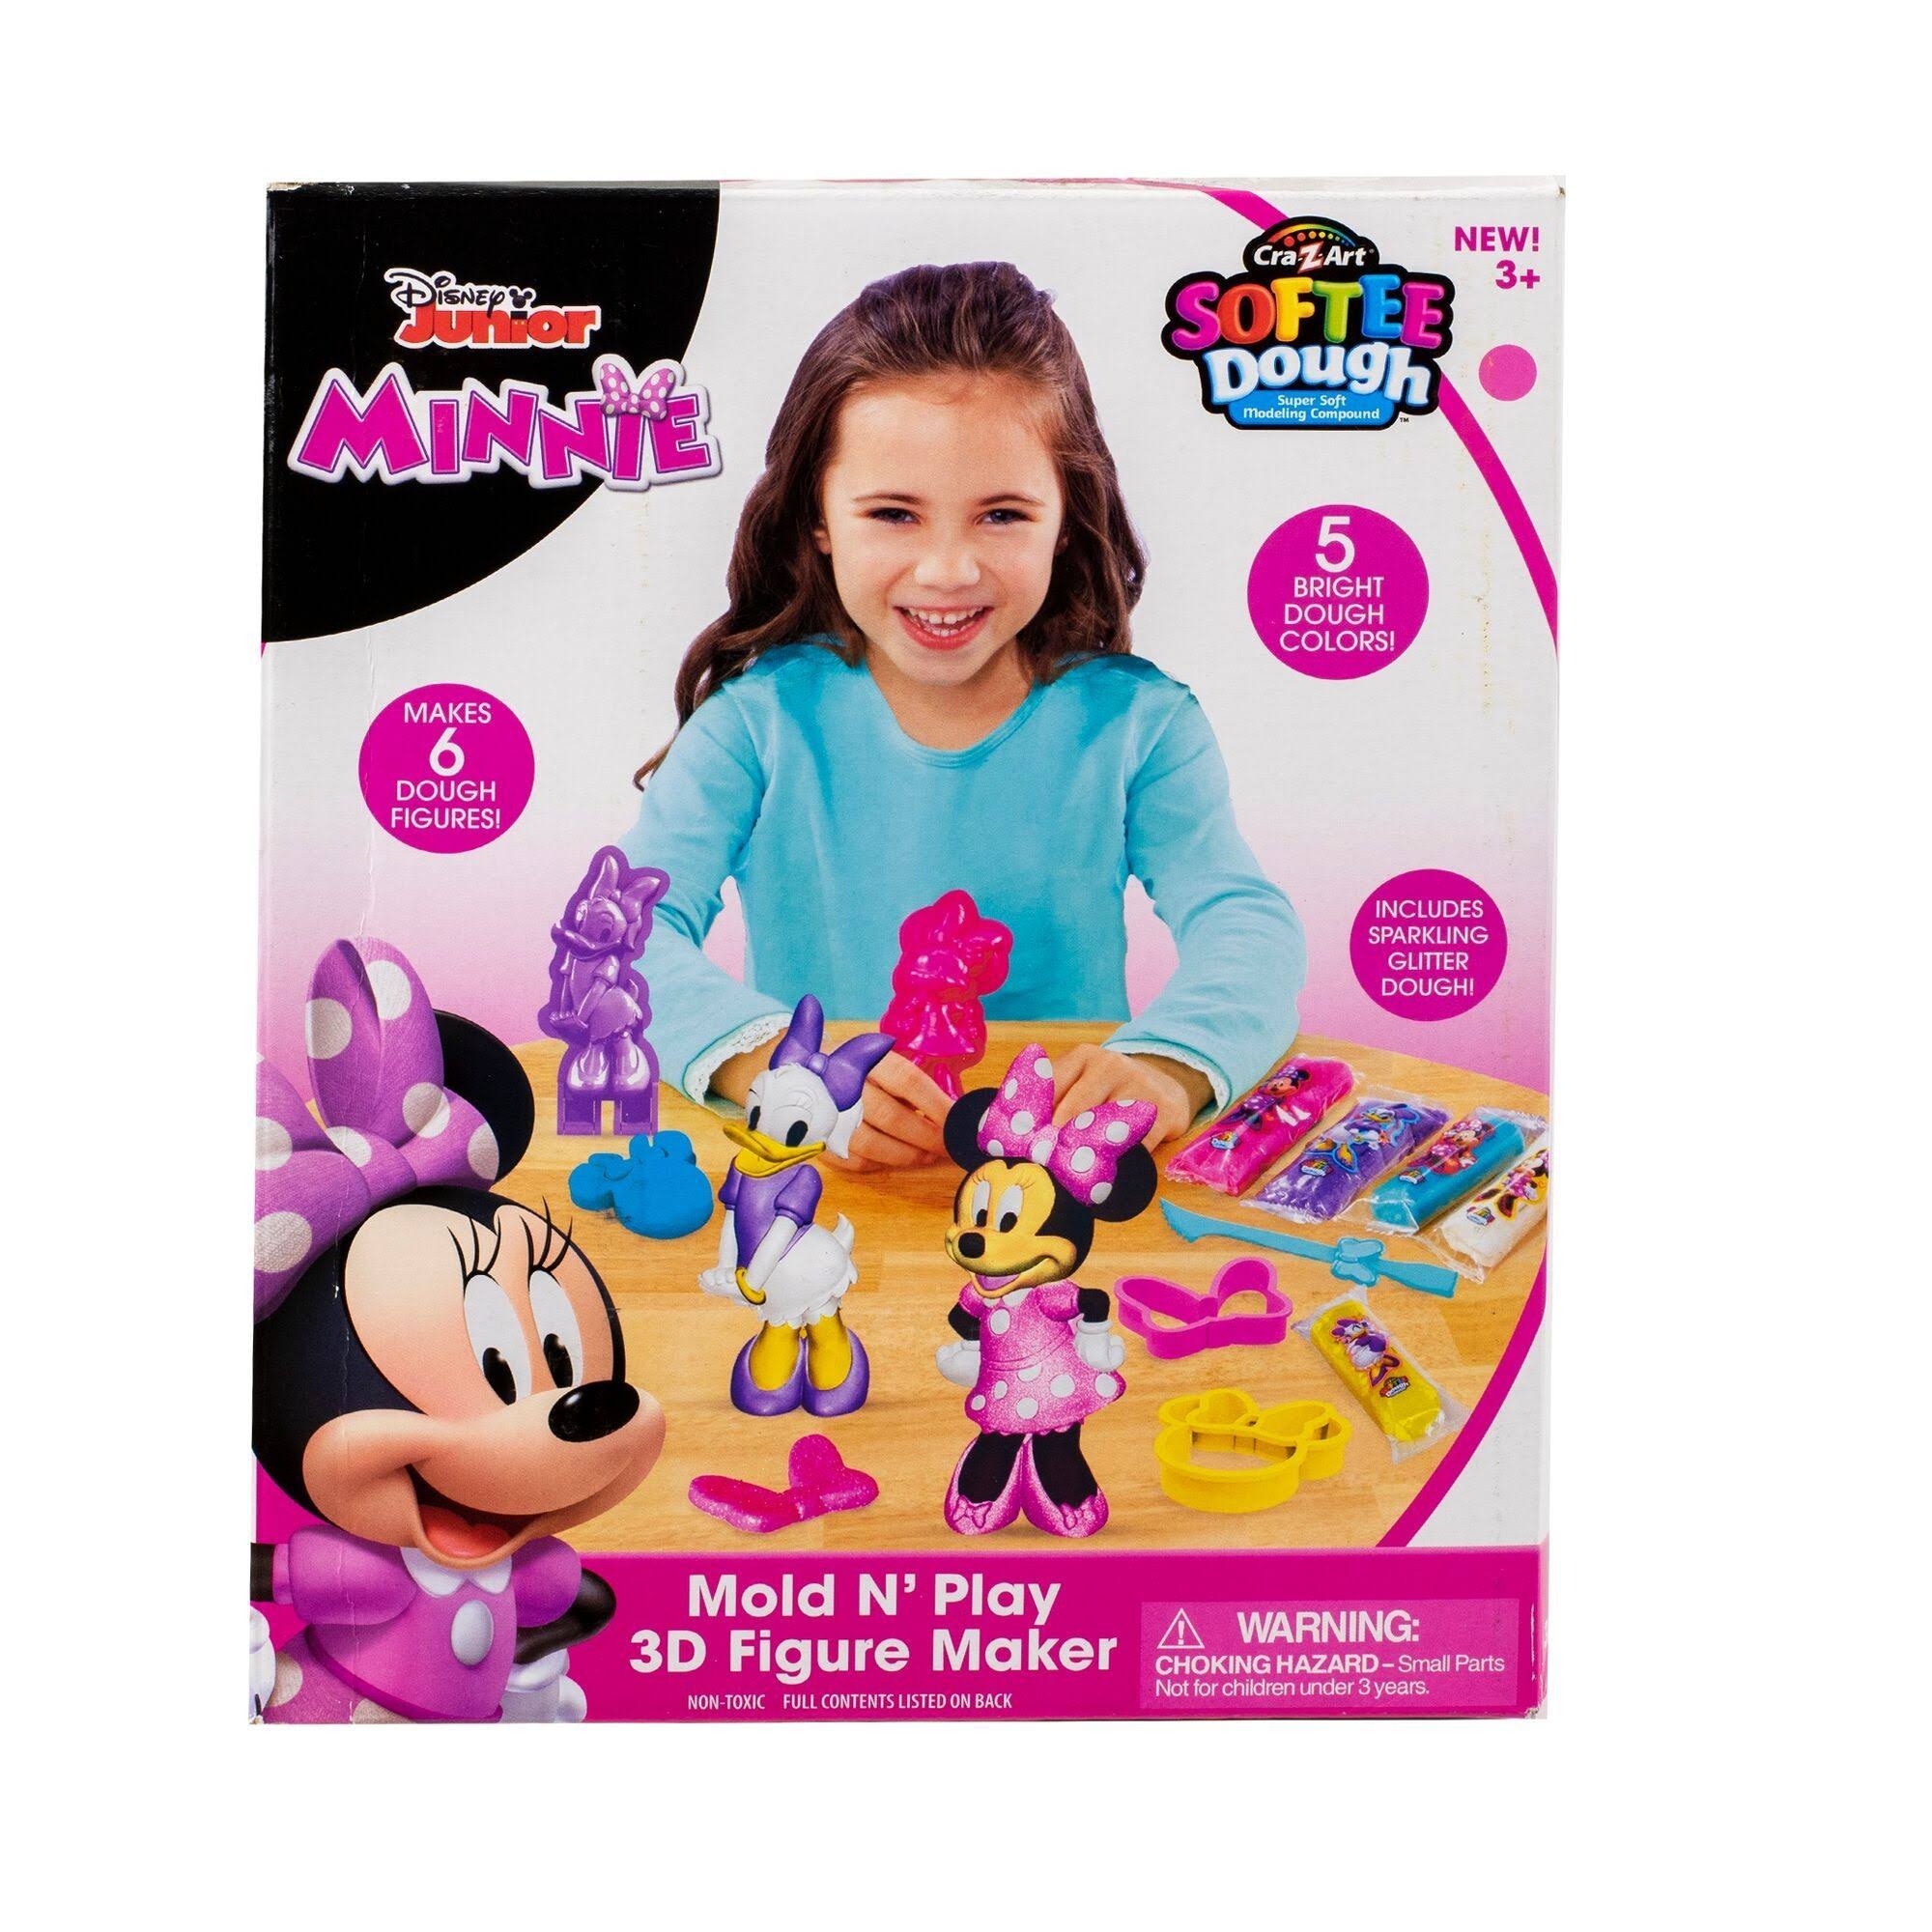 Minnie Mouse Mold N' Play 3D Figure Maker